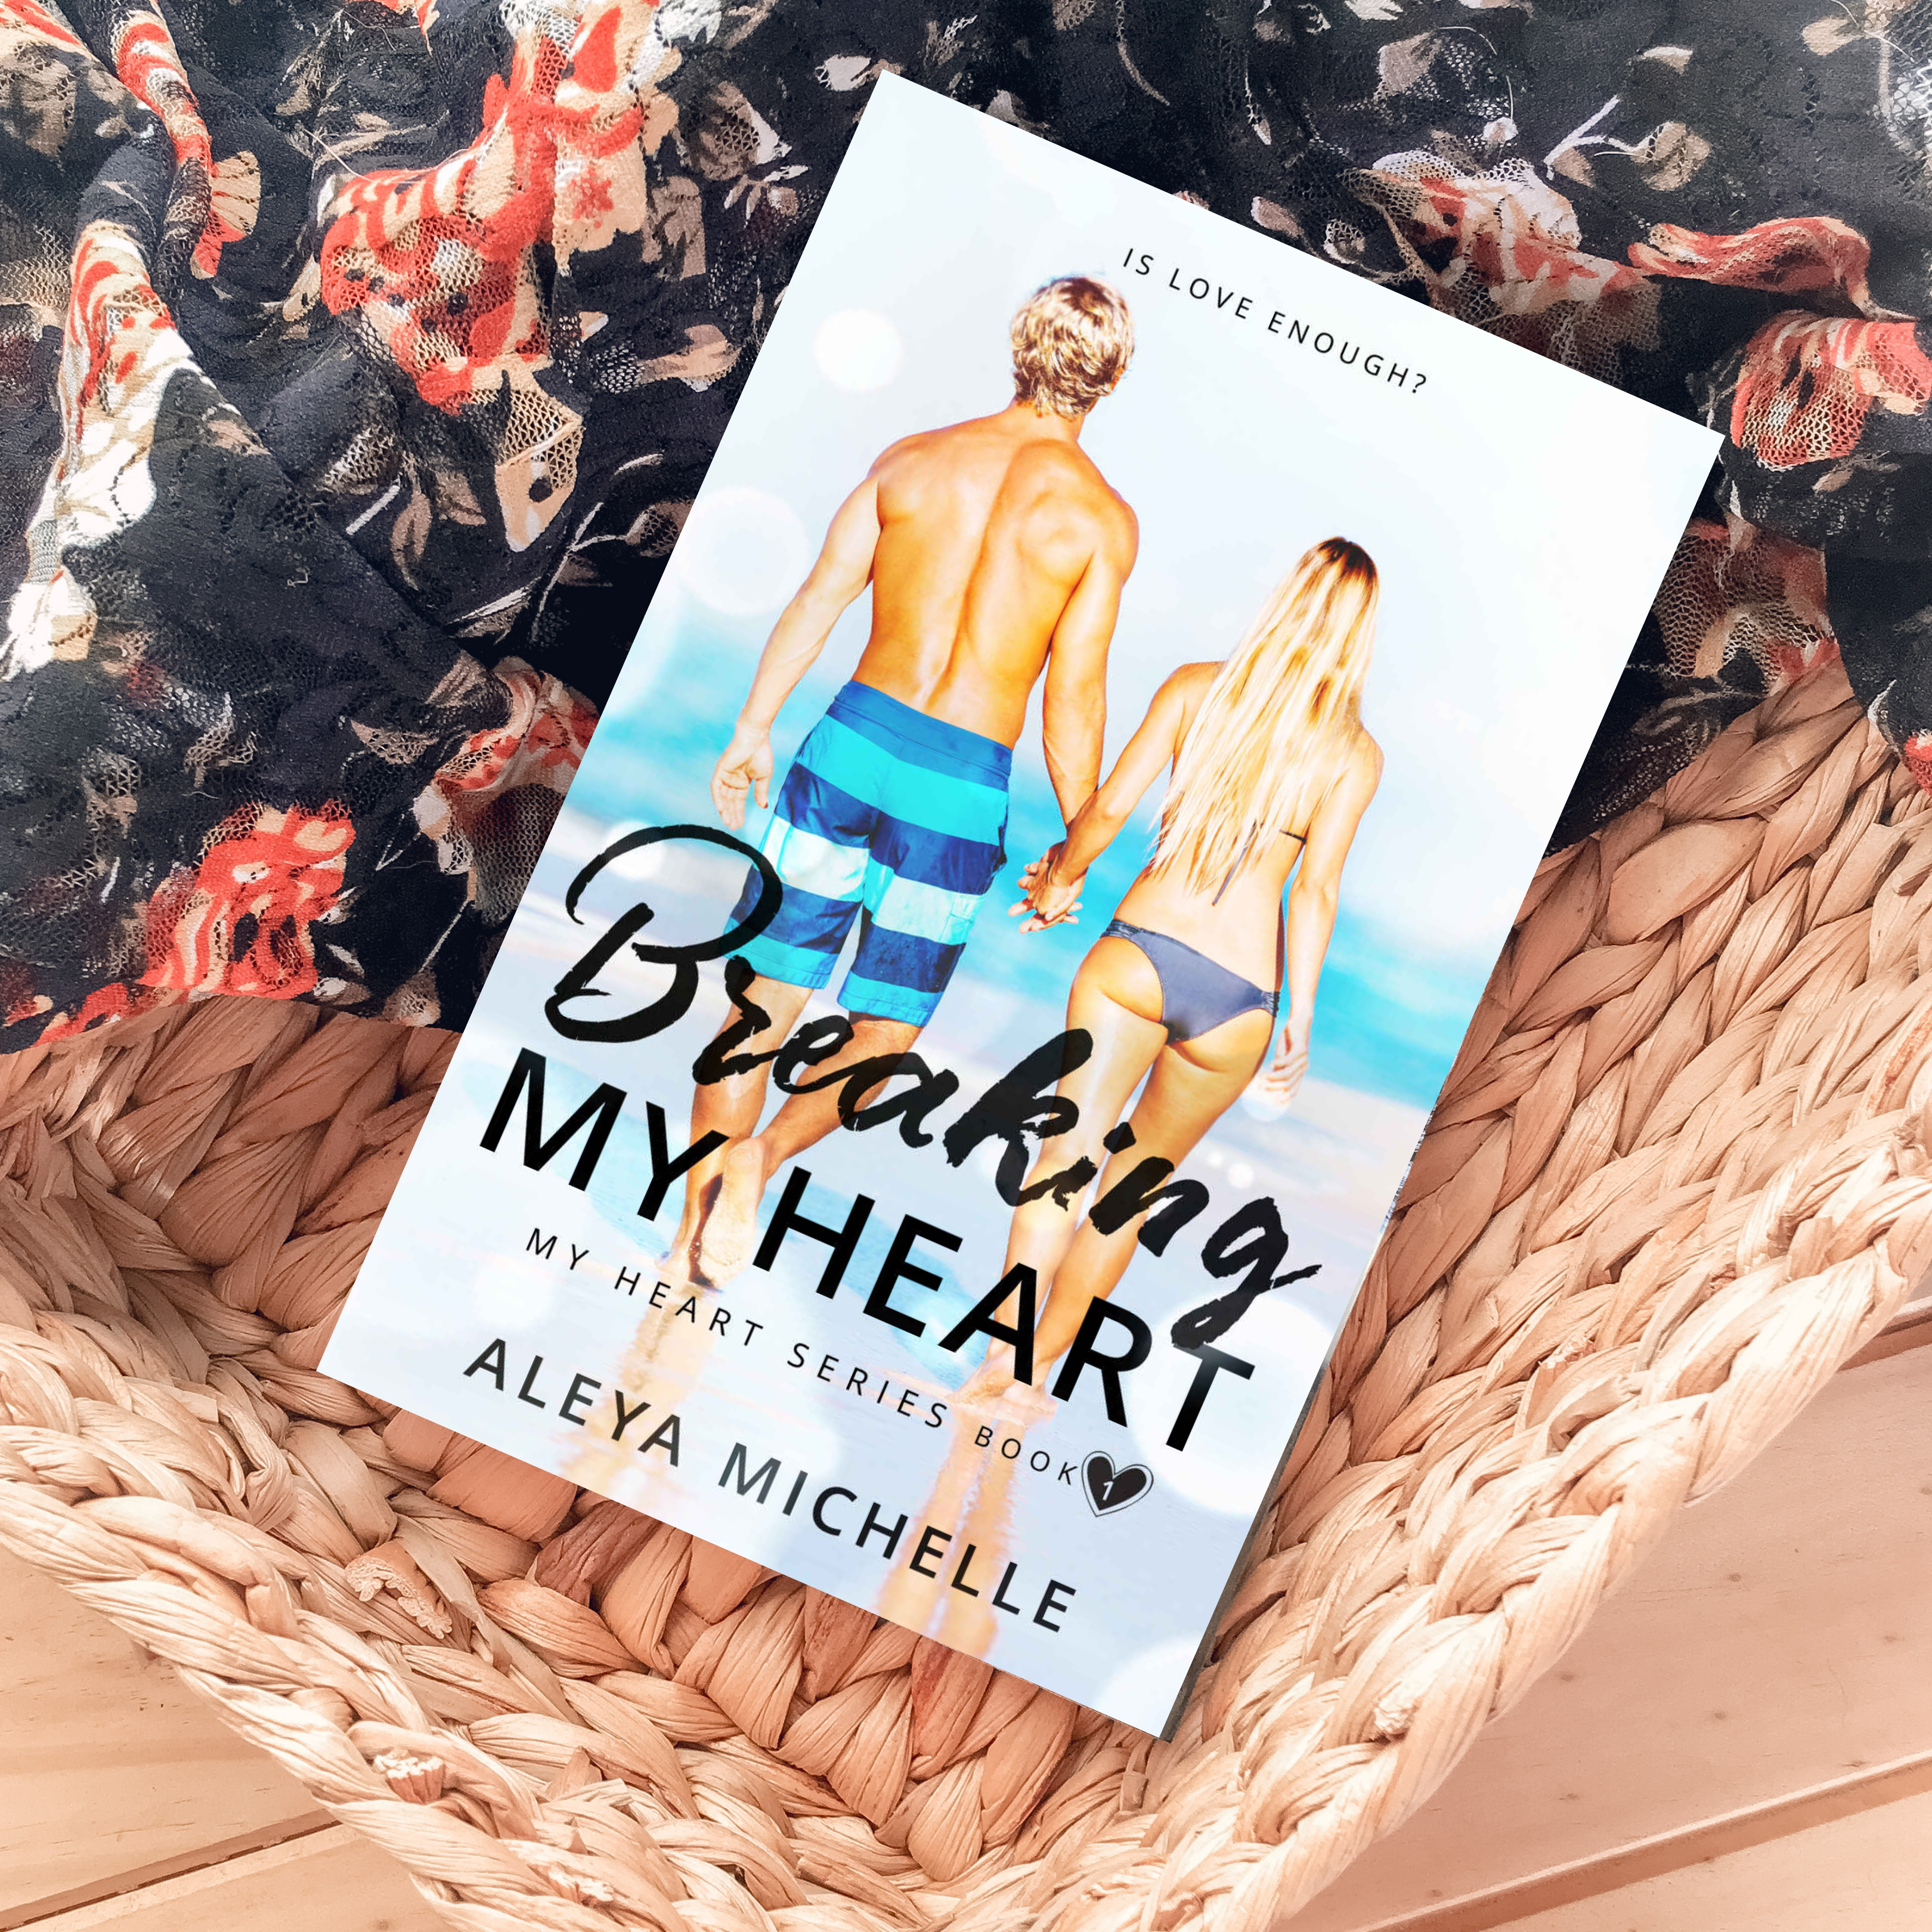 The Heart series by Aleya Michelle